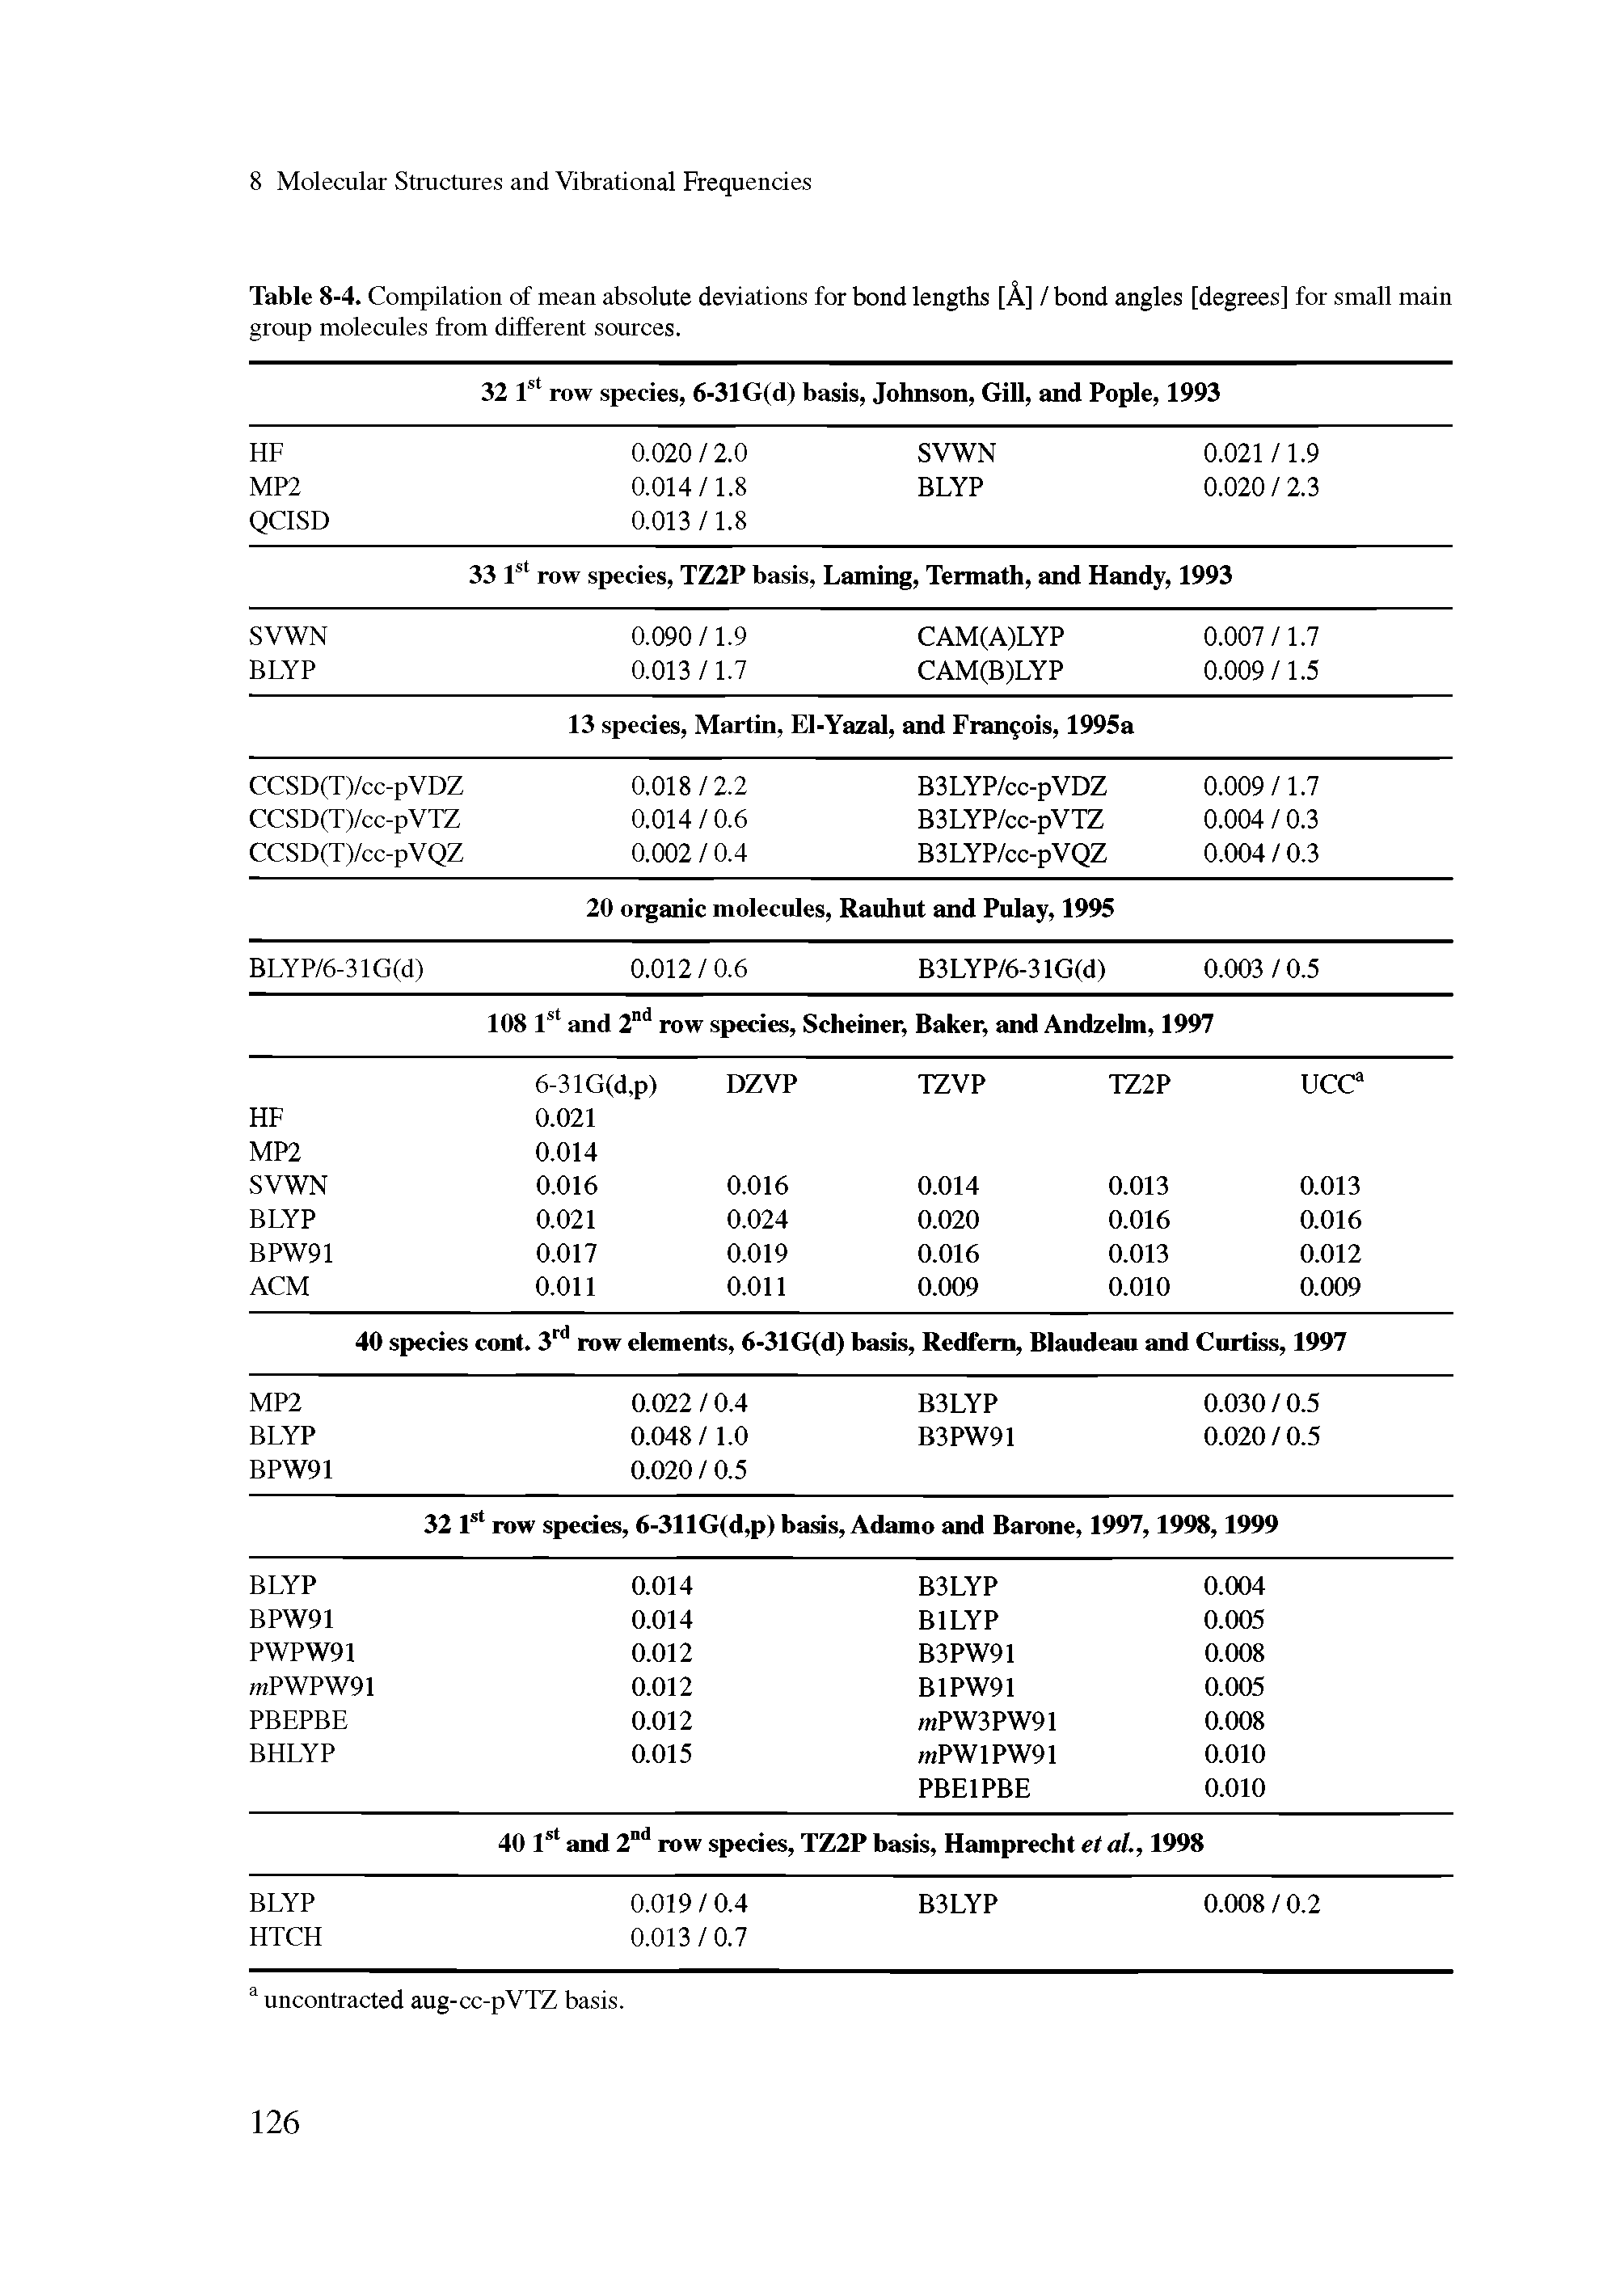 Table 8-4. Compilation of mean absolute deviations for bond lengths [A] / bond angles [degrees] for small main group molecules from different sources.